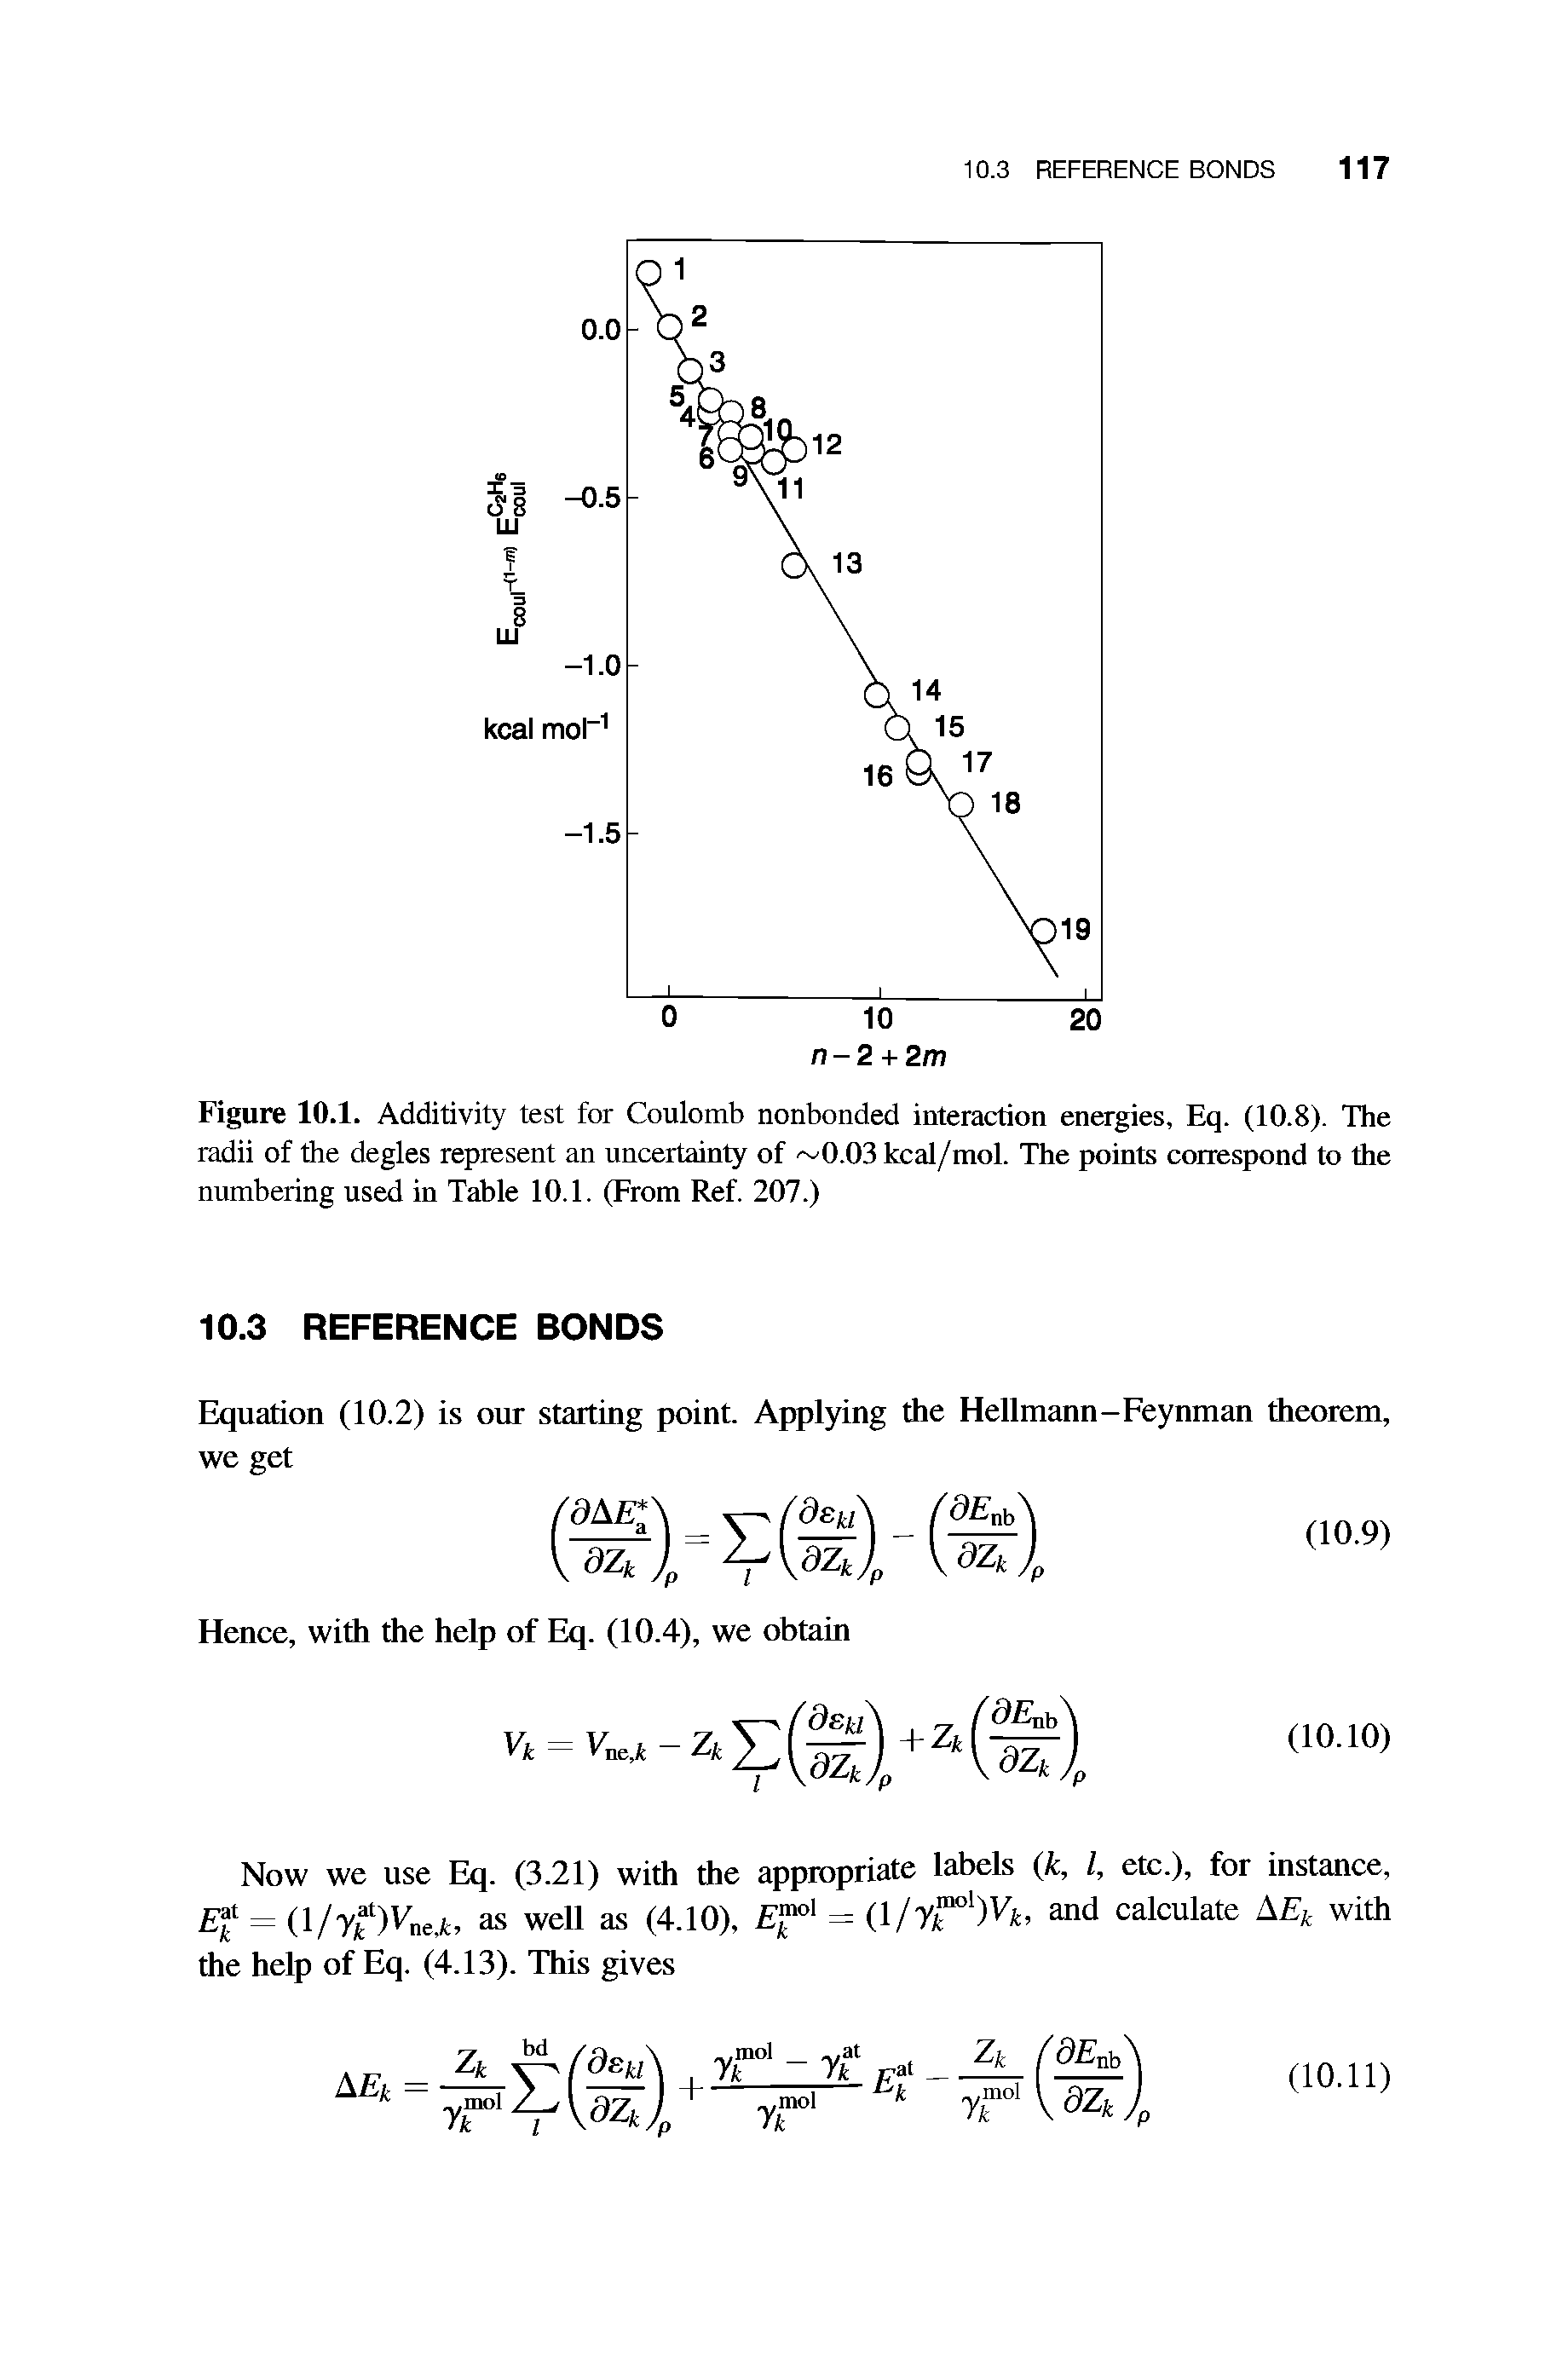 Figure 10.1. Additivity test for Coulomb nonbonded interaction energies, Eq. (10.8). The radii of the degles represent an uncertainty of 0.03 kcal/mol. The points correspond to the numbering used in Table 10.1. (From Ref. 207.)...